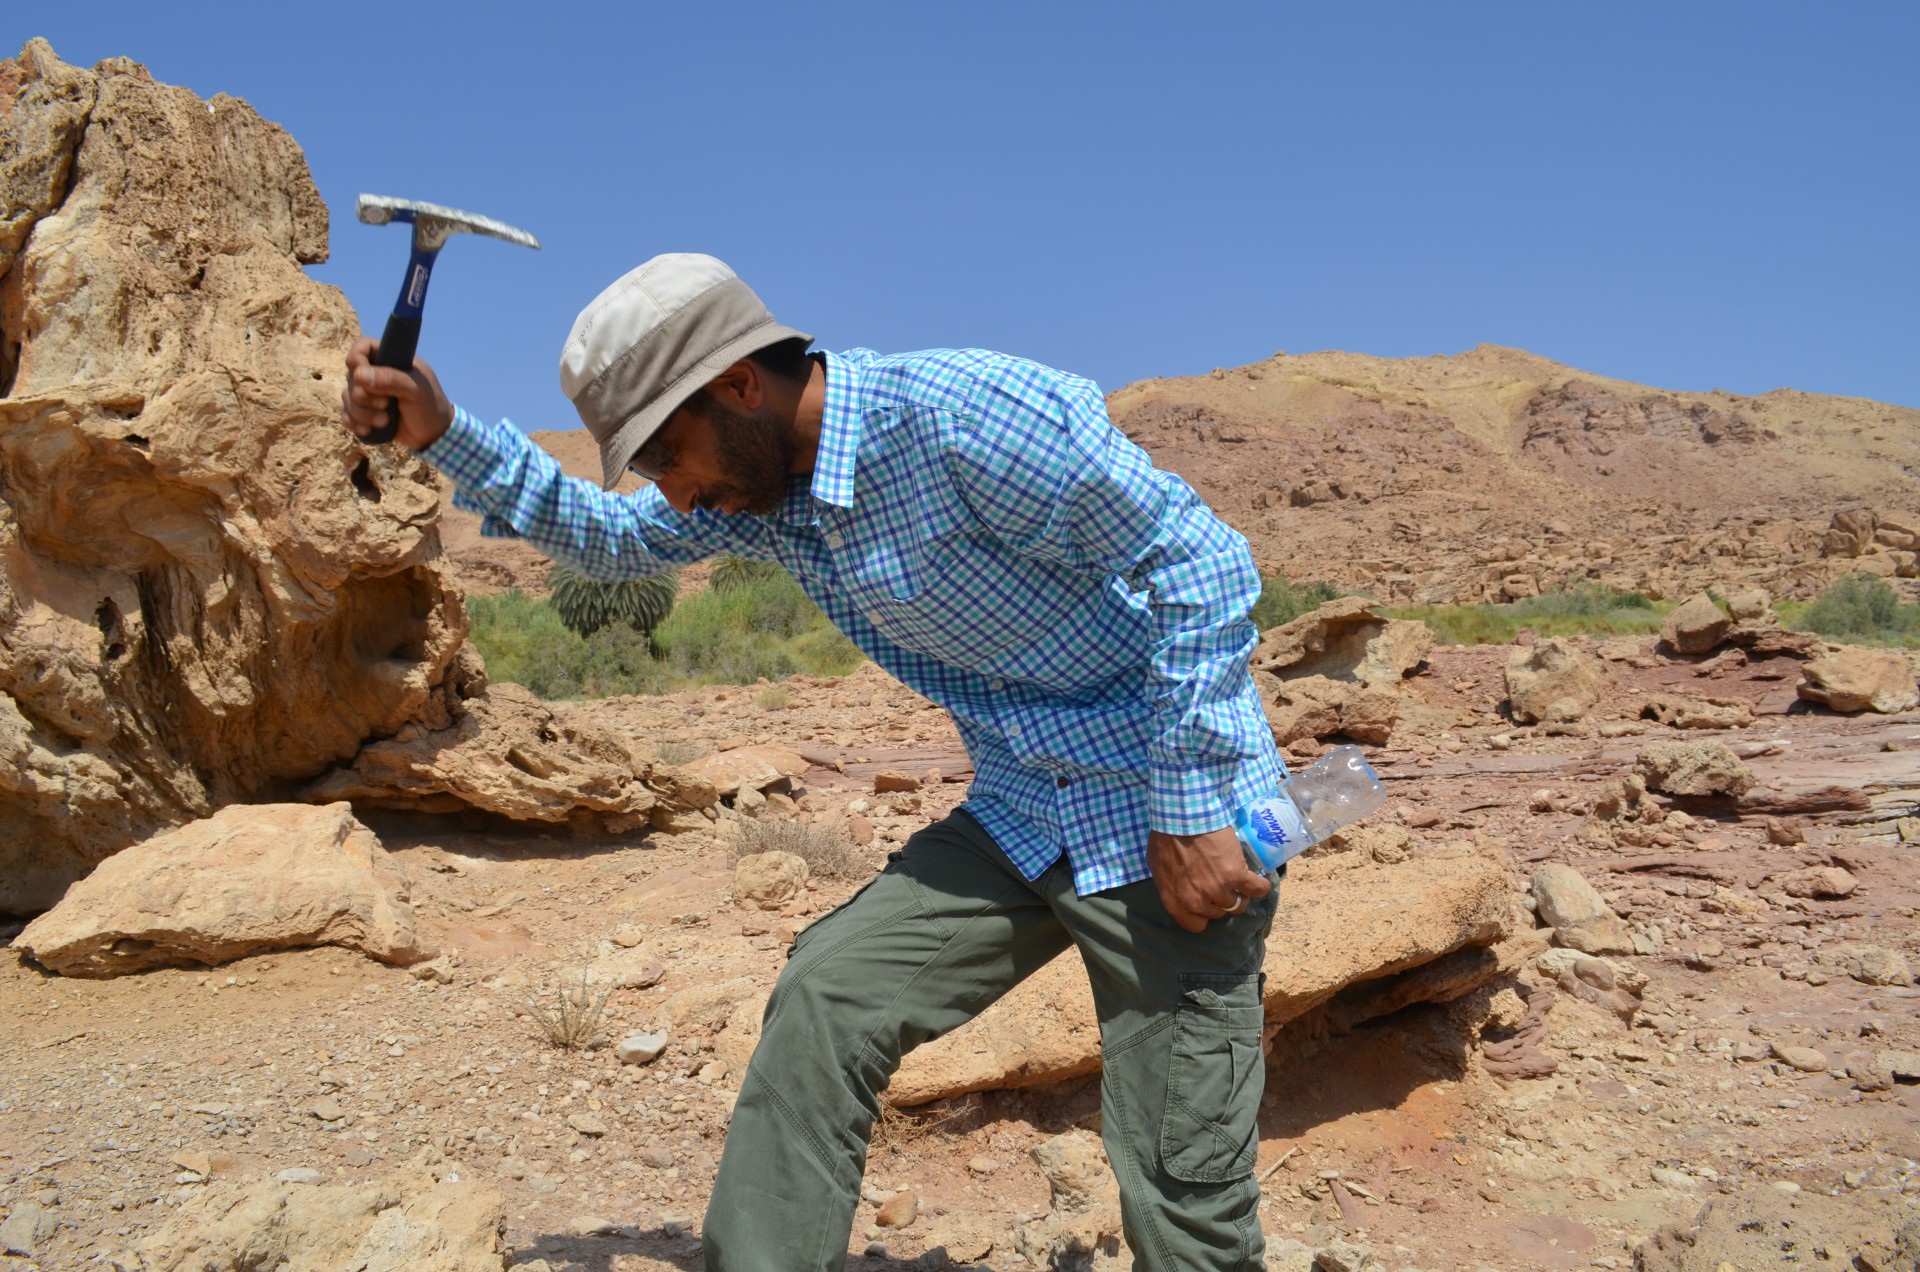 Marwan Raggad, a hydrologist at the University of Jordan, takes water shortages personally; the oasis town he grew up in has been withering due to excessive groundwater pumping.